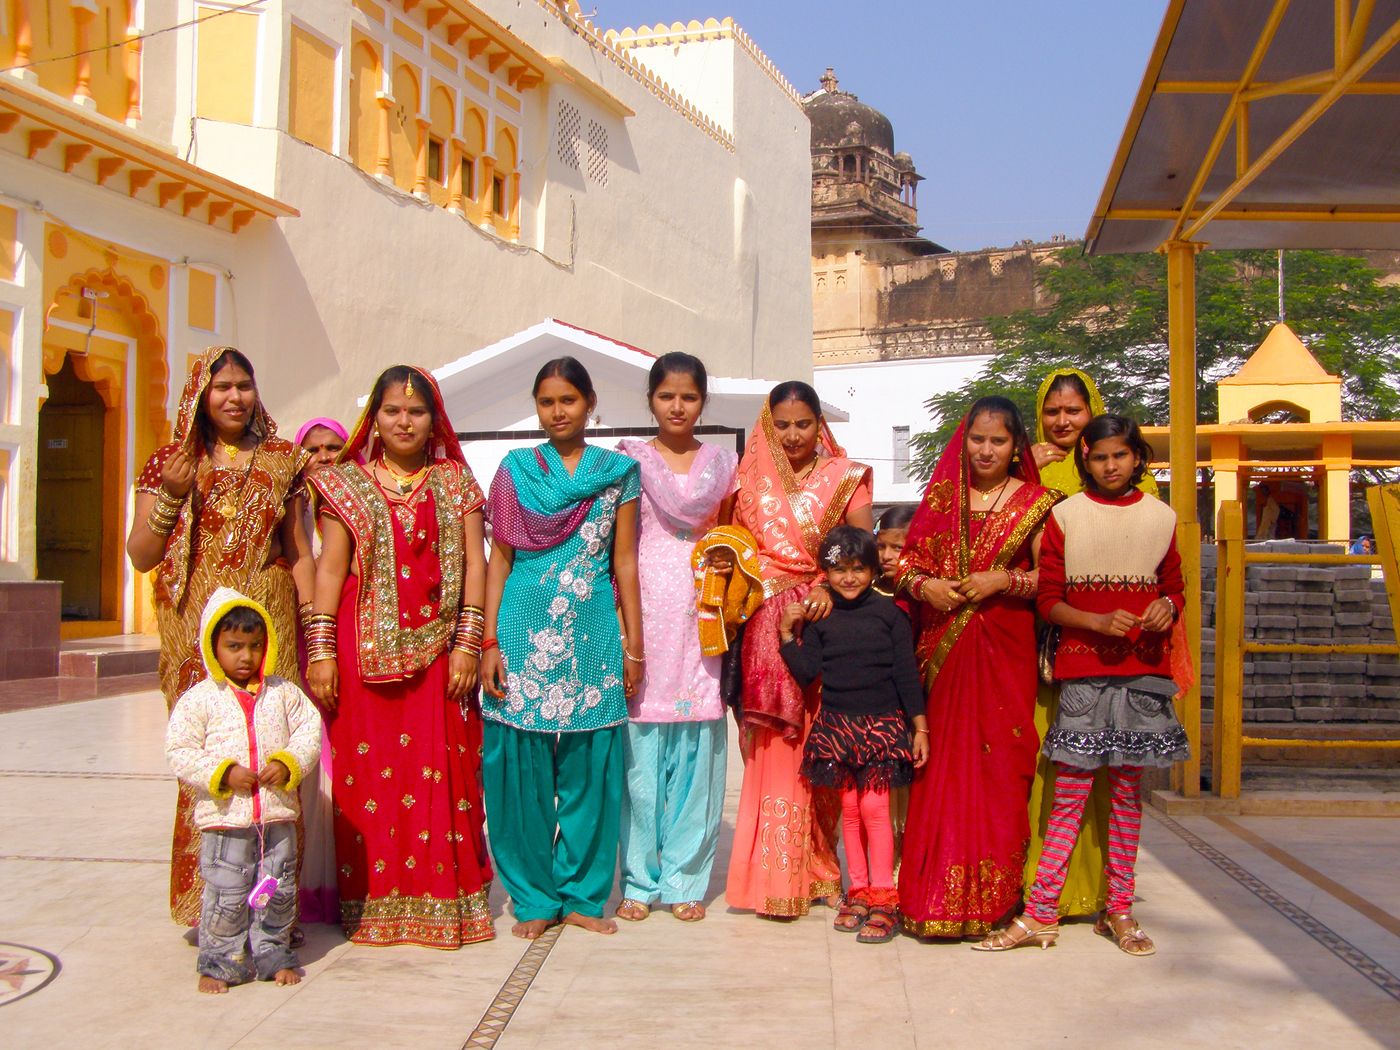 Against the backdrop of Ram Raja temple, some women in traditional Indian clothes take a picture. It is a holy Hindu pilgrimage site well-known as Orchha Temple 